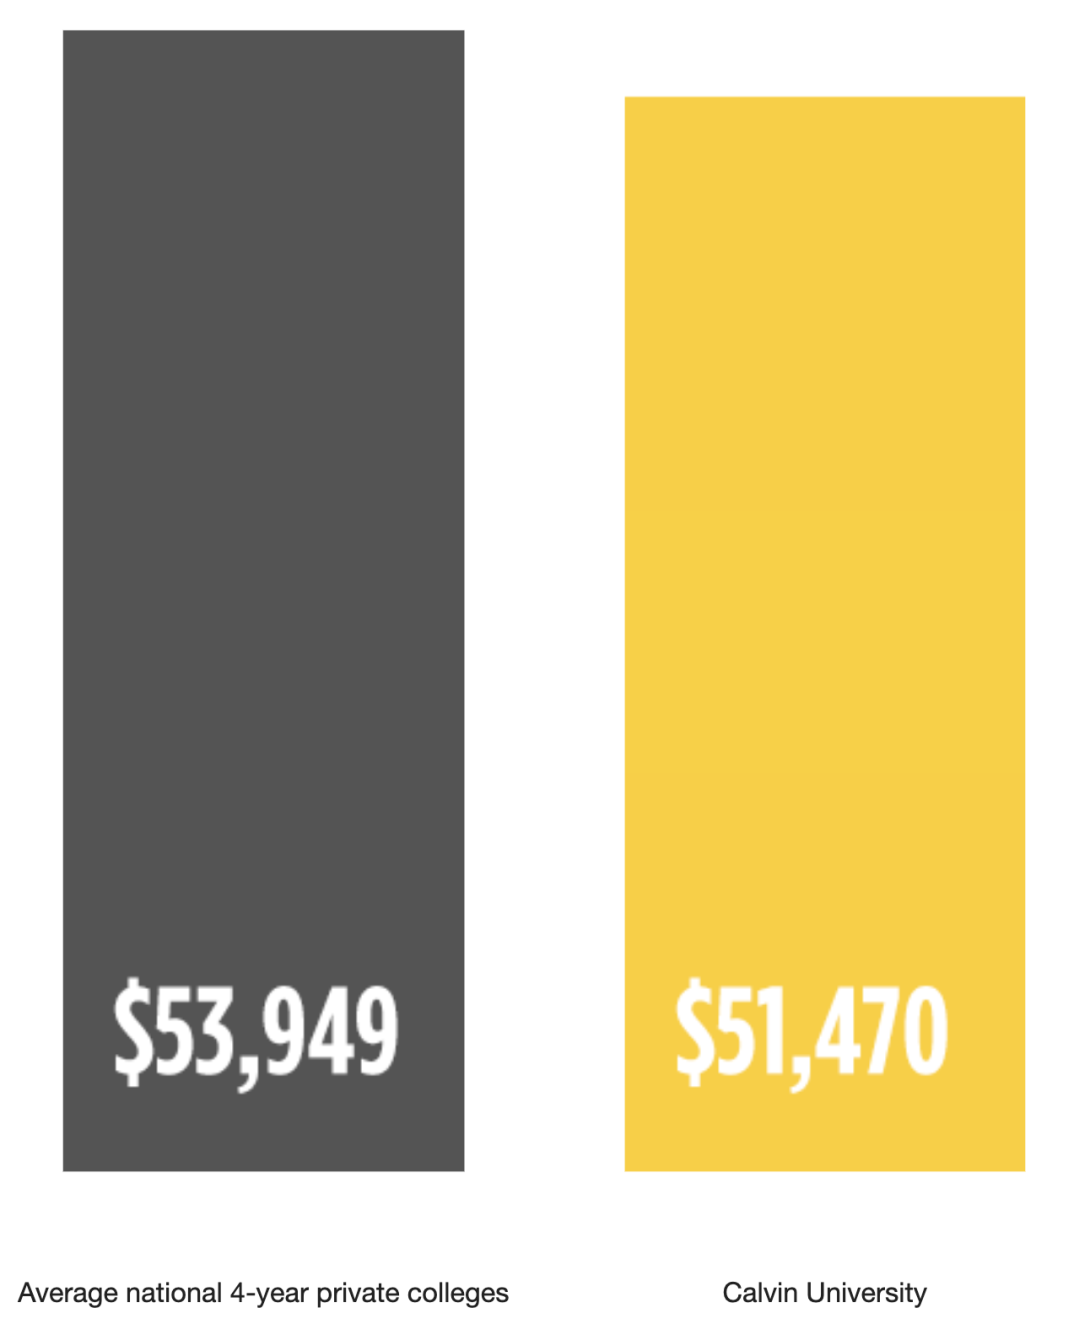 Bar chart showing $53,949 average national 4-year private colleges, vs. $51,470 Calvin University.